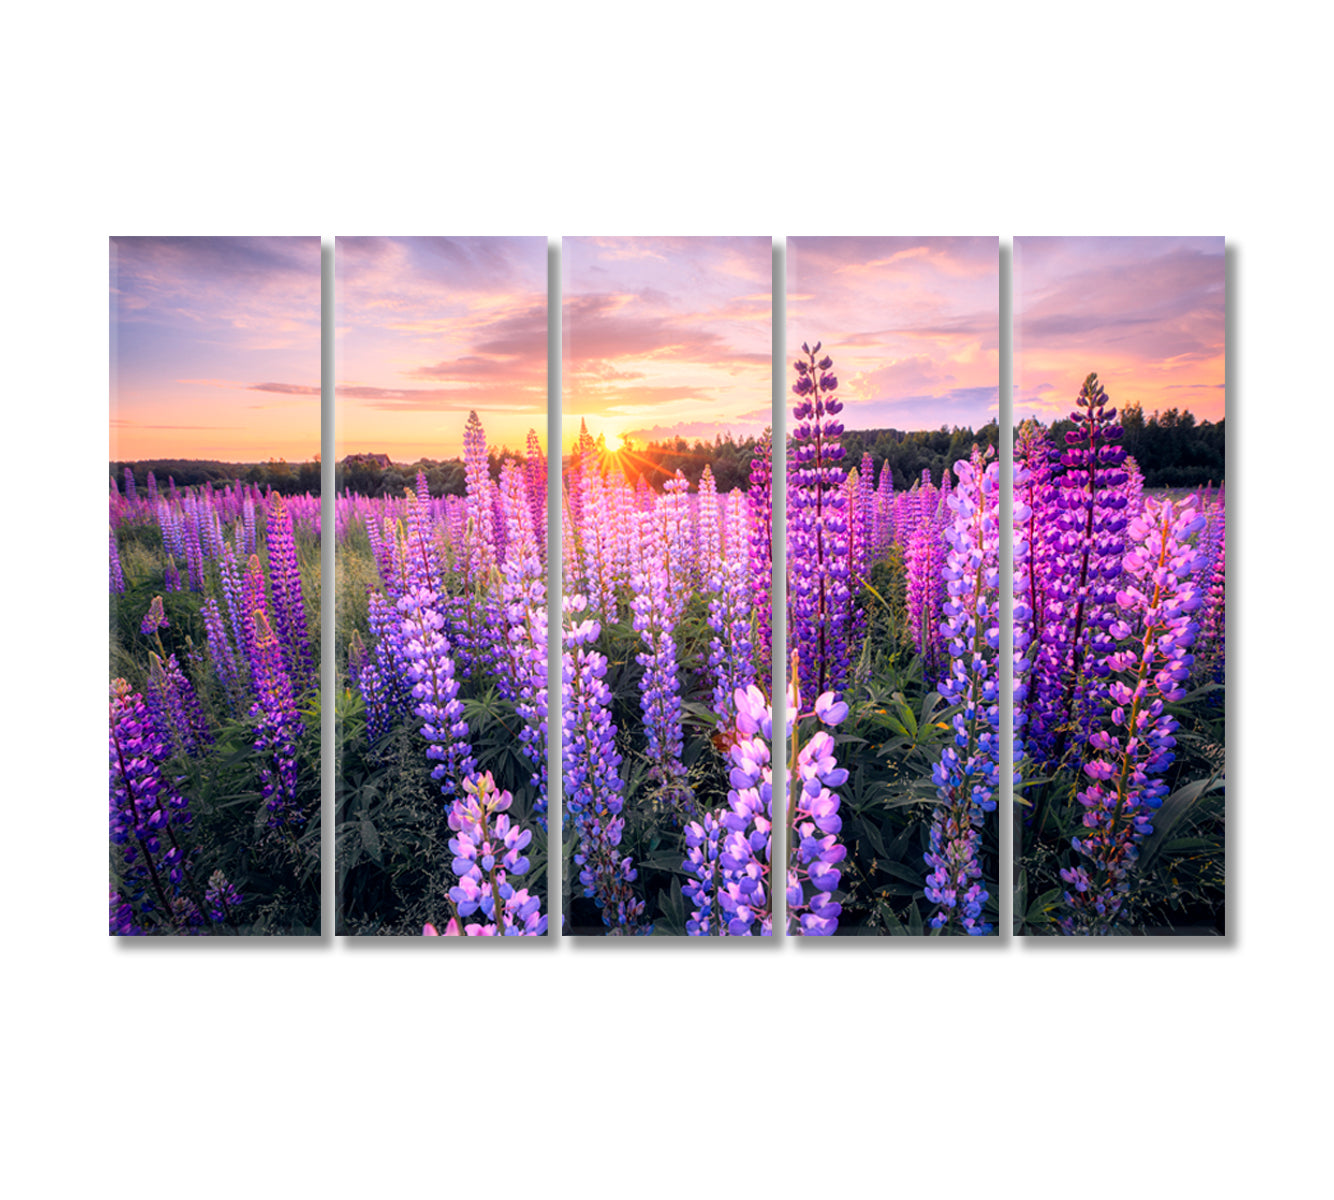 Summer Sunset over Field with Blooming Lupins Canvas Print-Canvas Print-CetArt-5 Panels-36x24 inches-CetArt